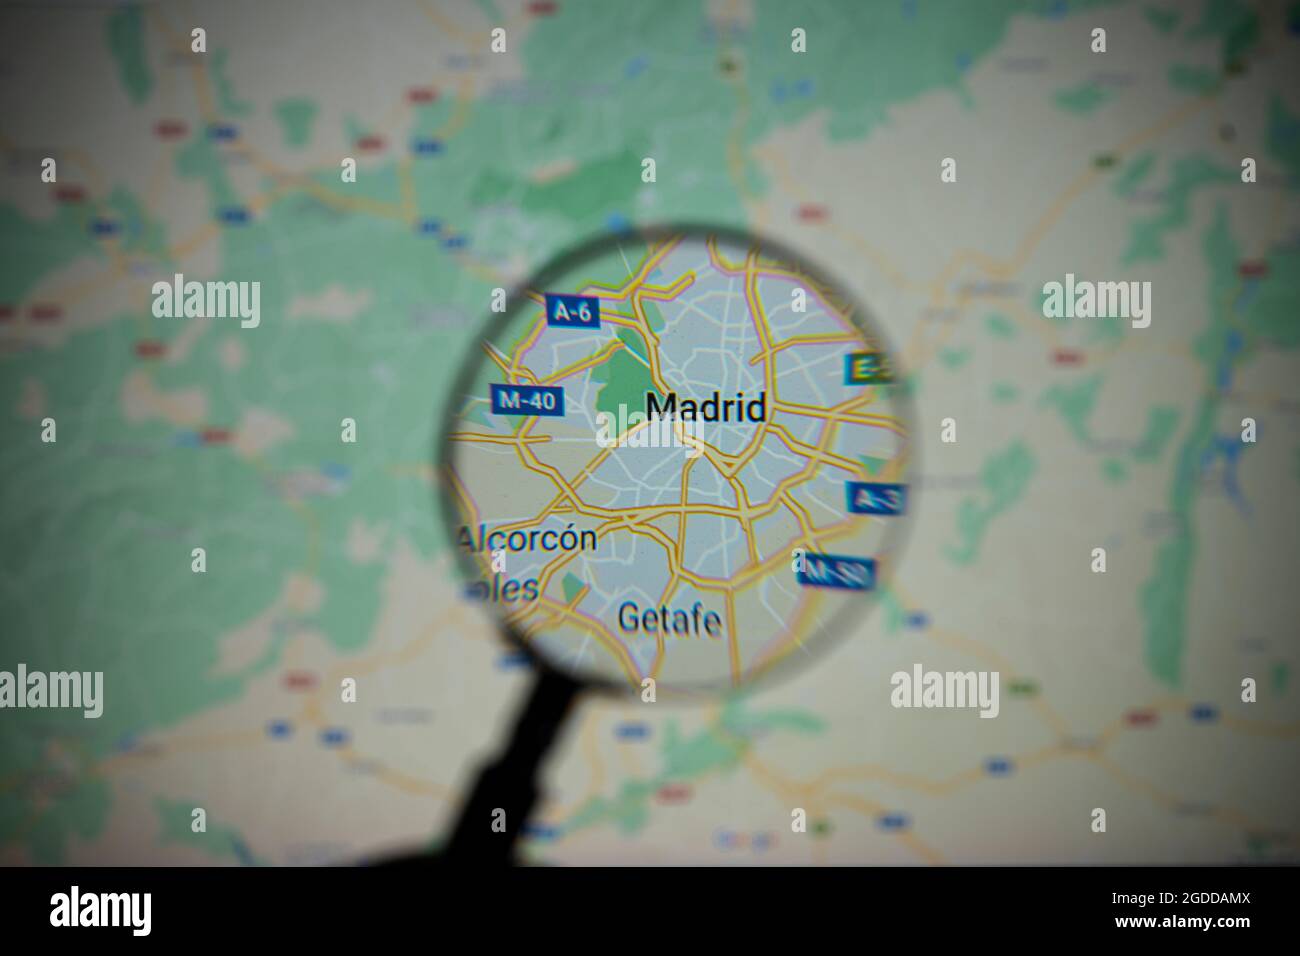 view of the city of Madrid, capital of Spain, through a magnifying glass on Google Maps Stock Photo